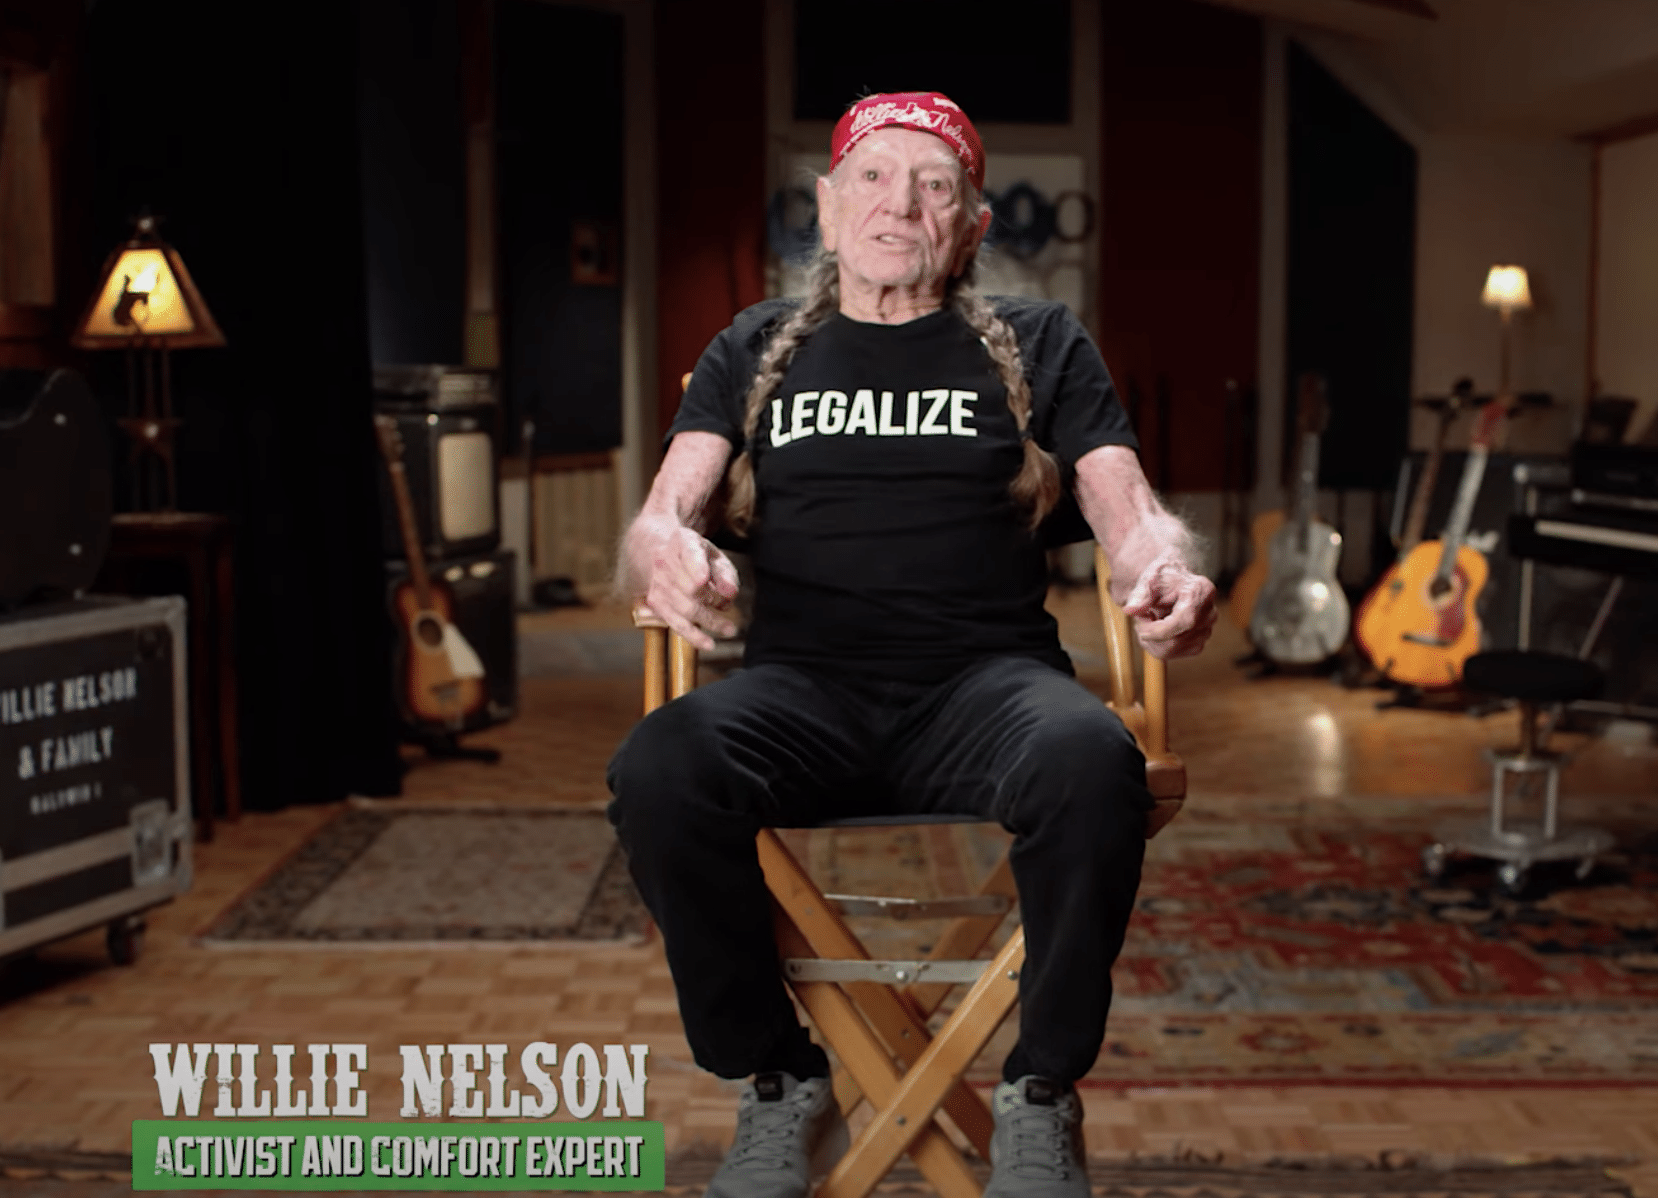 Willie Nelson advocates for the legalization of "Sketchers" in new Super Bowl ad